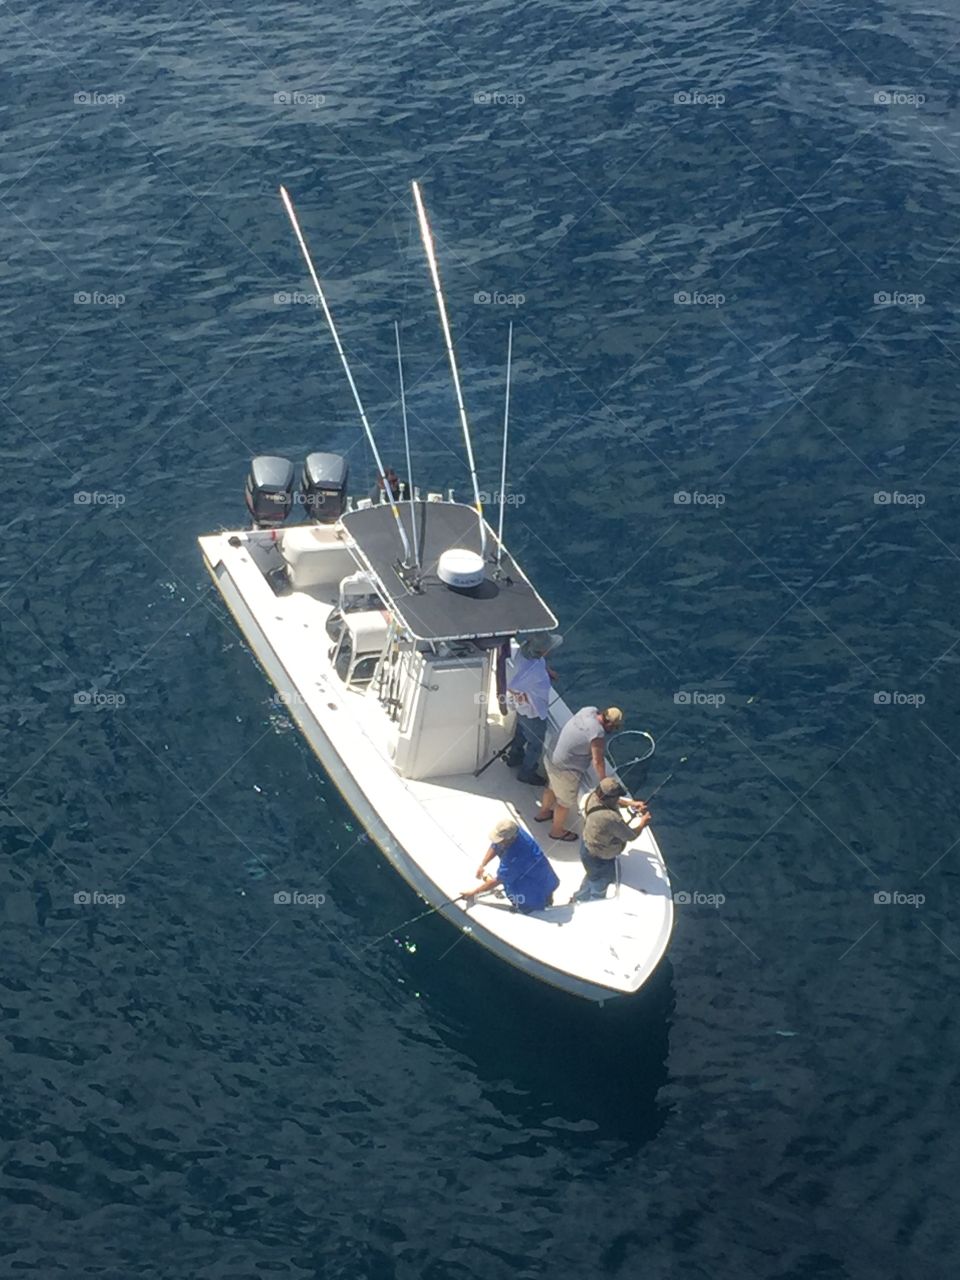 Fisherman fishing 50 miles out into the Gulf of Mexico 